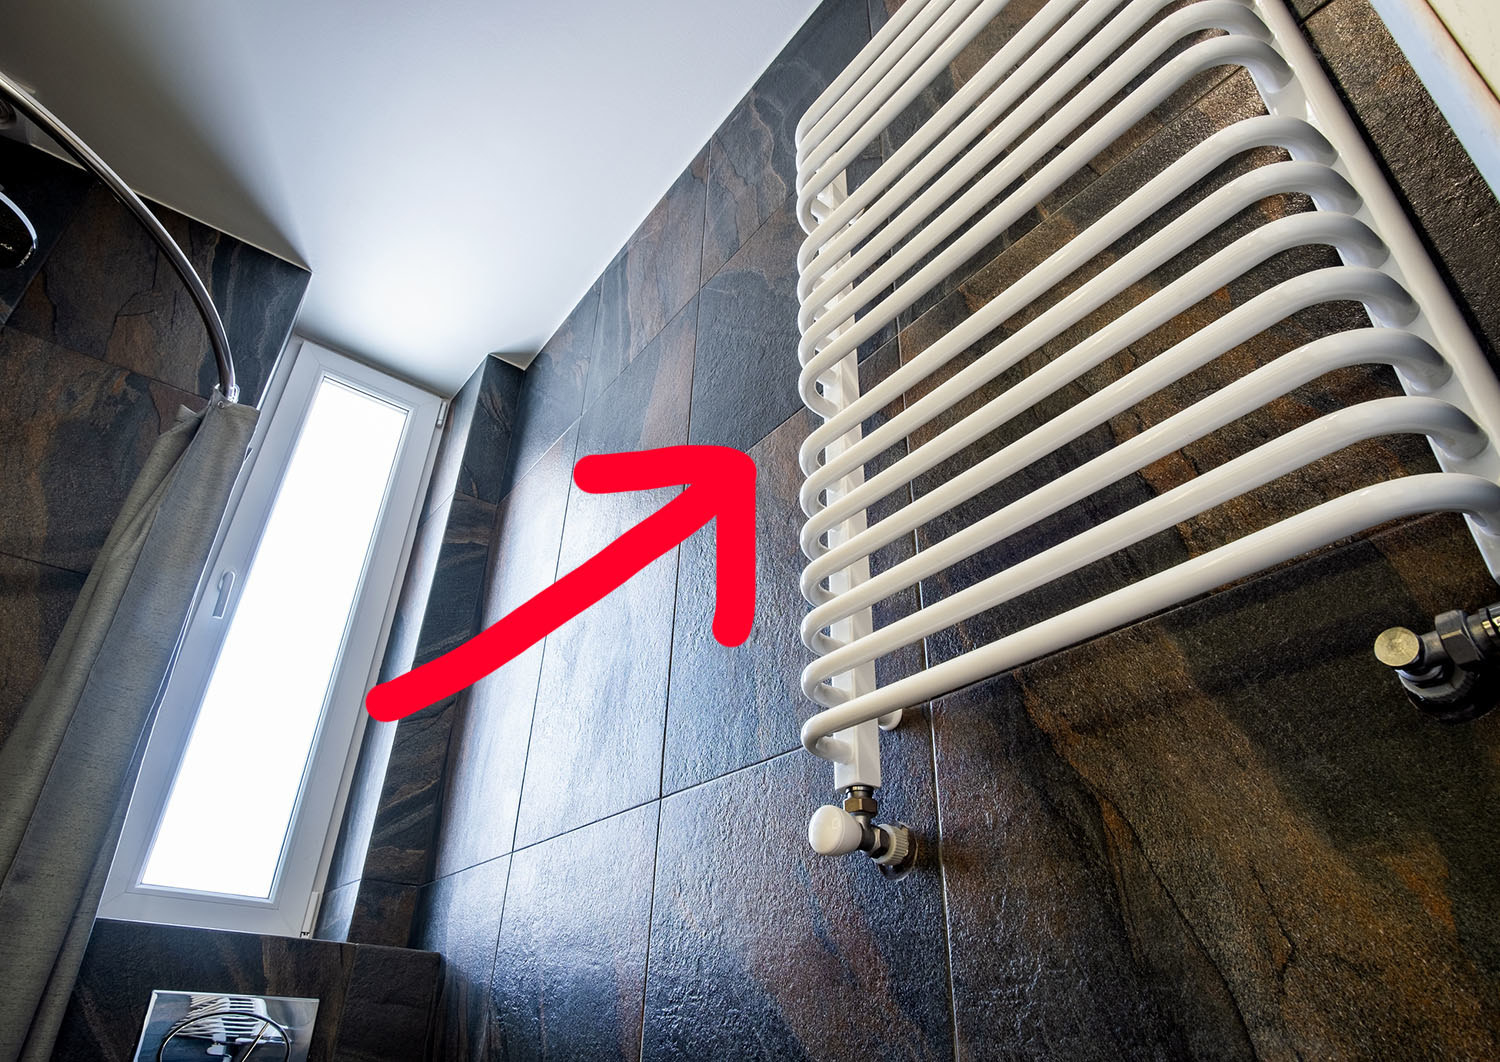 an arrow pointing to a ladder-like towel warmer